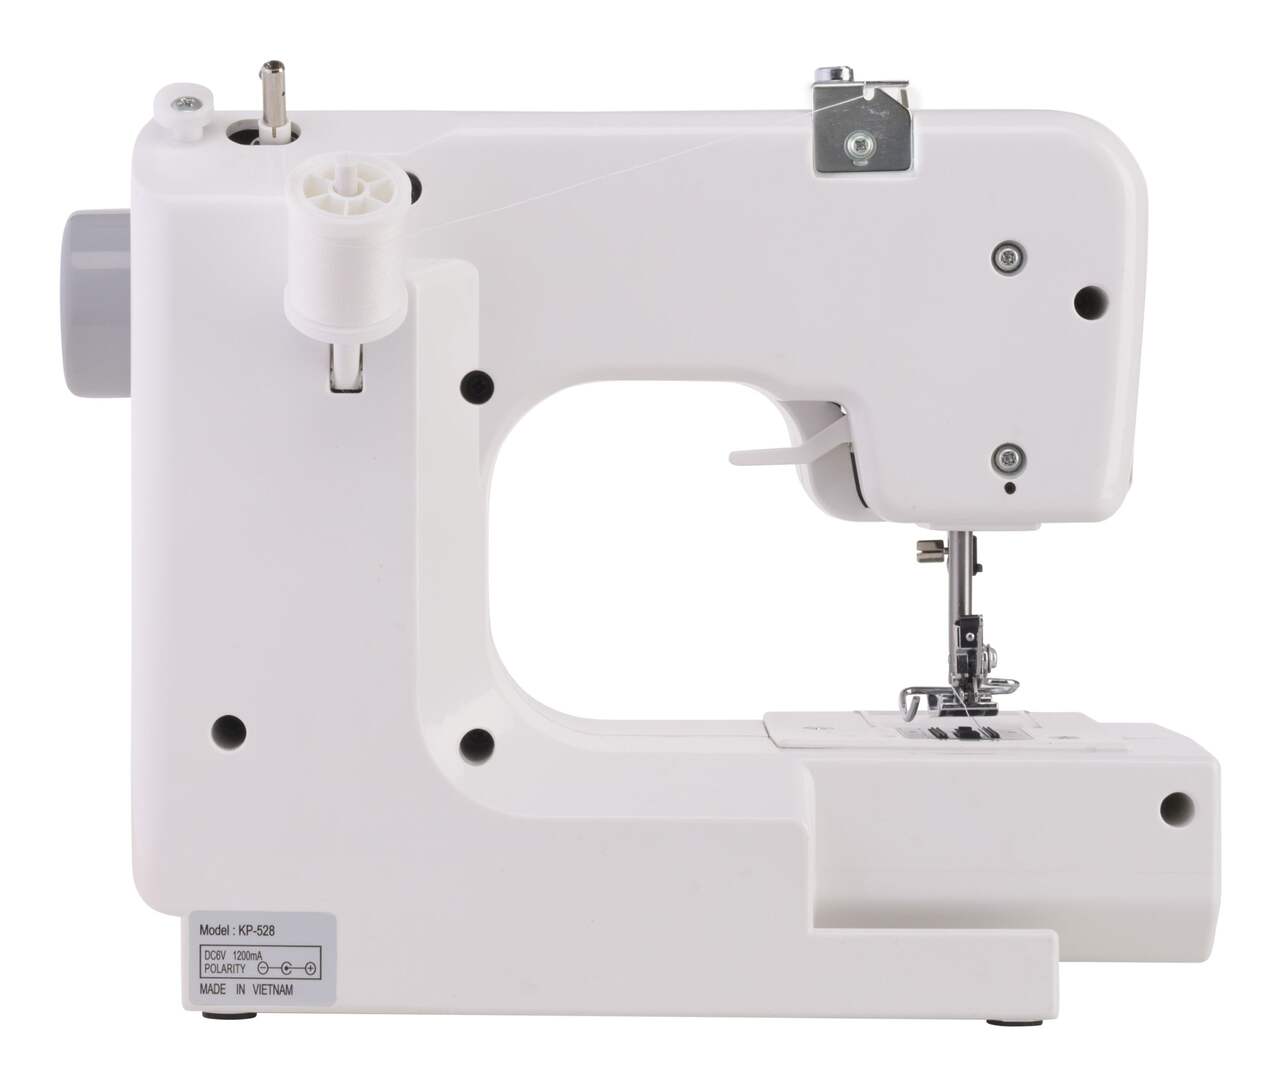 SINGER M1000 Mending Sewing Machine - Simple, Portable, Great for  Beginners, Mending & Light Sewing 